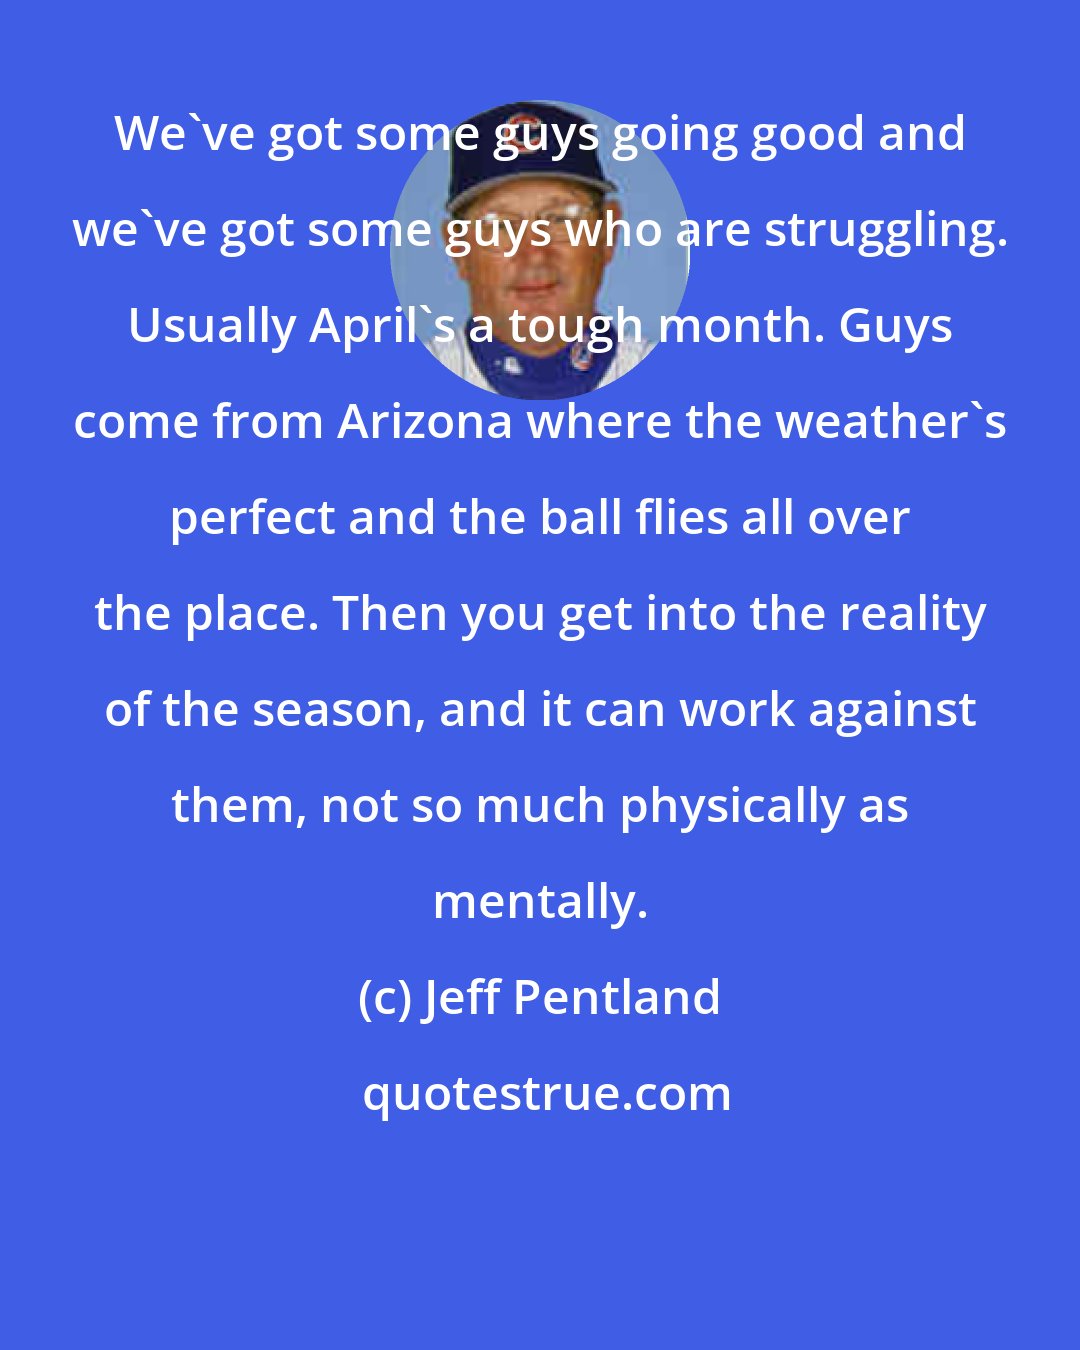 Jeff Pentland: We've got some guys going good and we've got some guys who are struggling. Usually April's a tough month. Guys come from Arizona where the weather's perfect and the ball flies all over the place. Then you get into the reality of the season, and it can work against them, not so much physically as mentally.